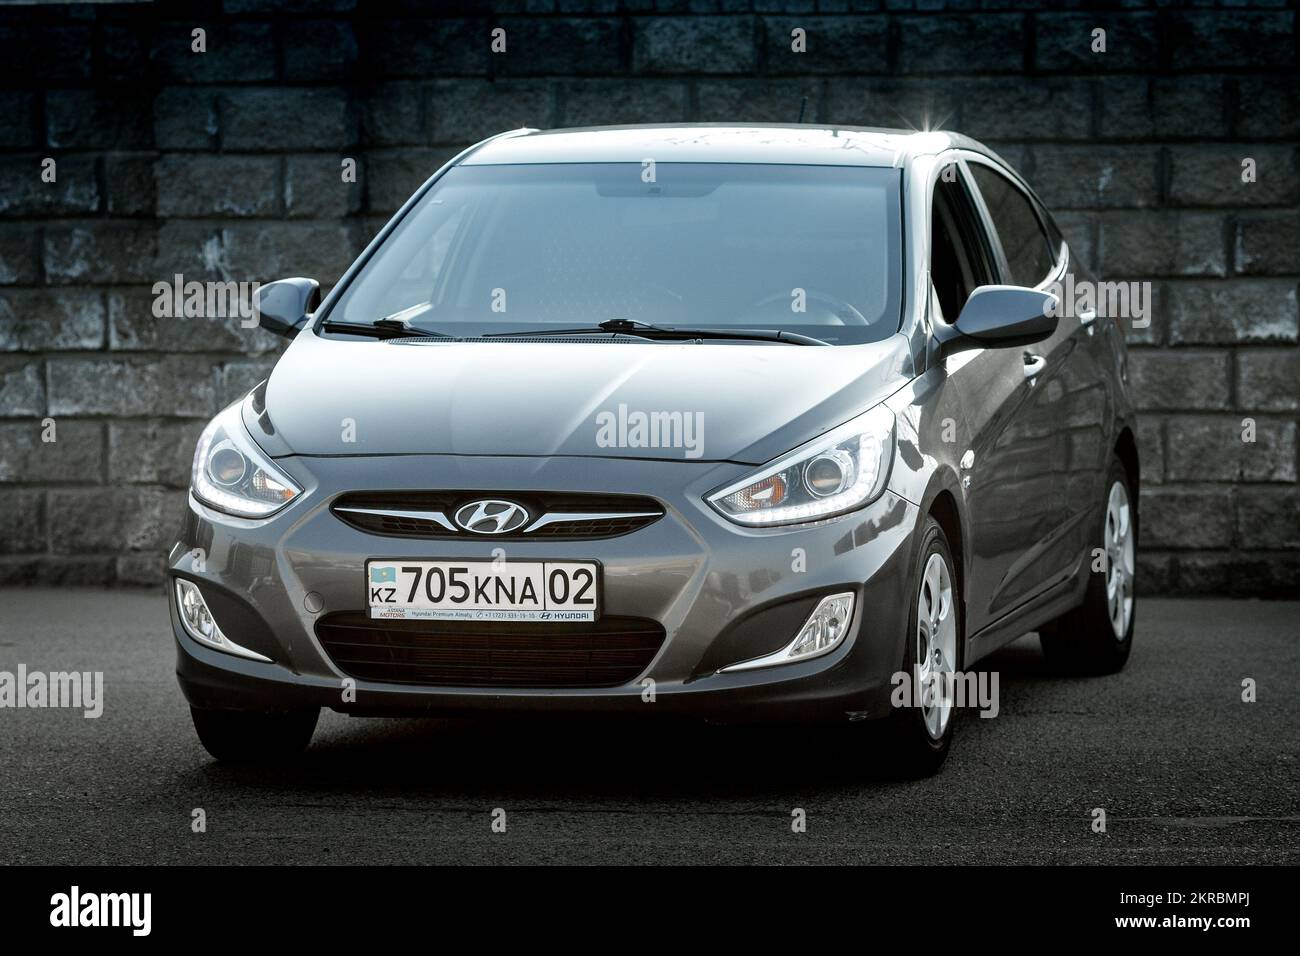 https://c8.alamy.com/comp/2KRBMPJ/hyundai-accent-in-grey-color-with-almaty-car-number-front-view-2KRBMPJ.jpg